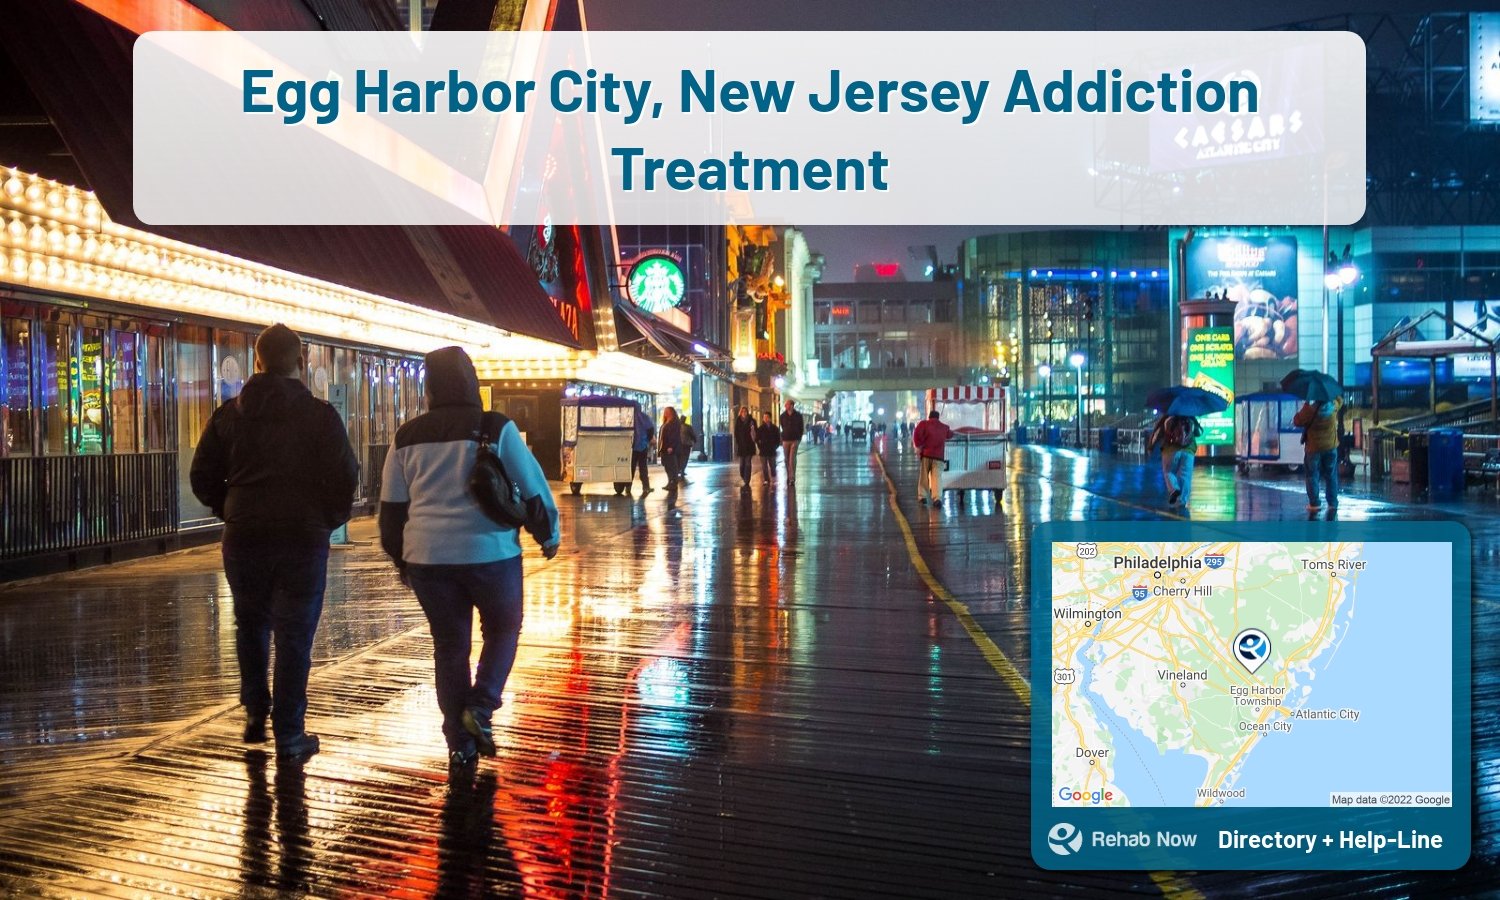 Our experts can help you find treatment now in Egg Harbor City, New Jersey. We list drug rehab and alcohol centers in New Jersey.